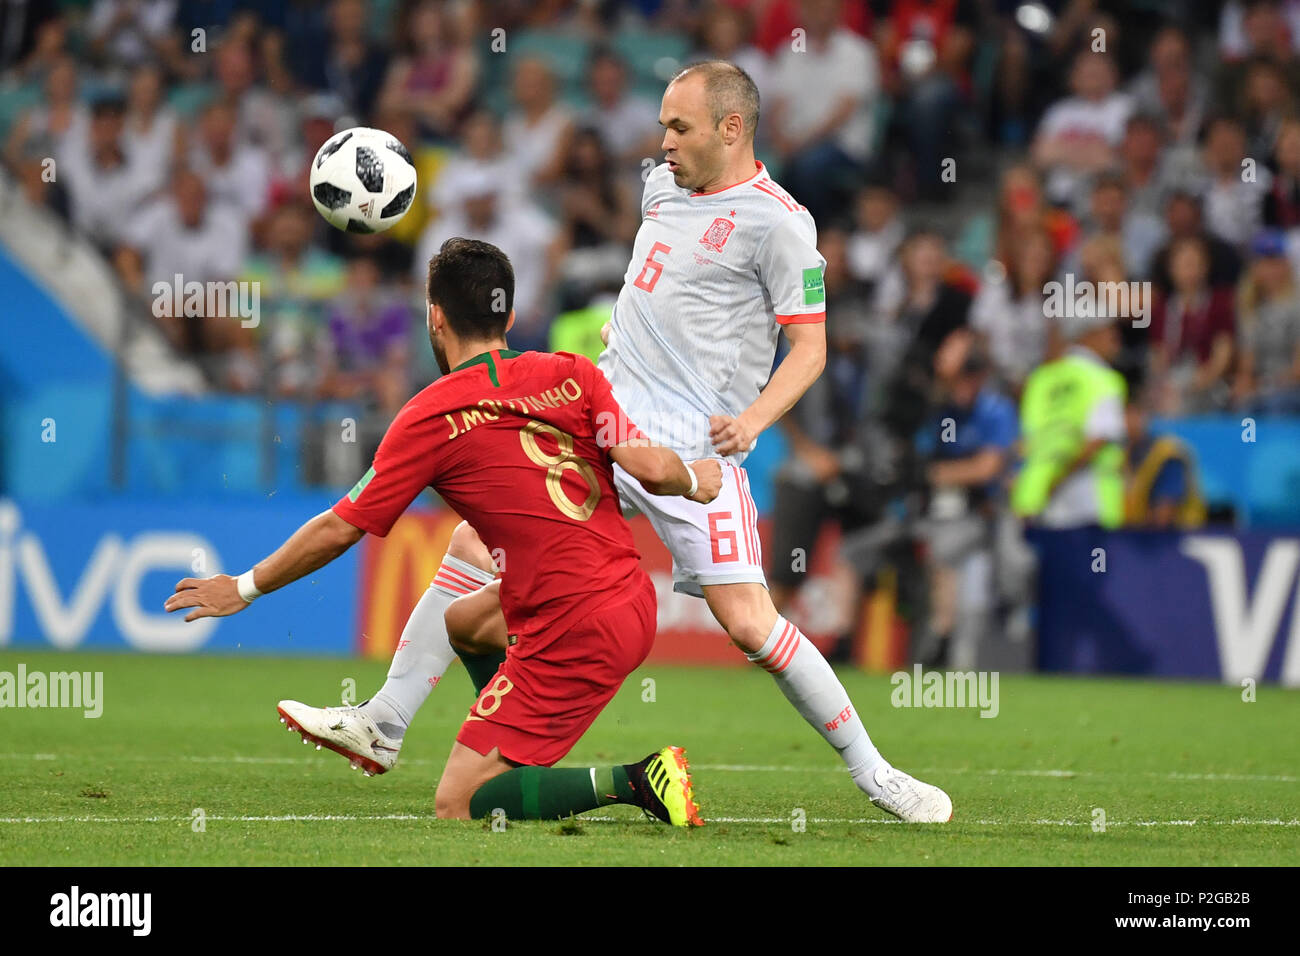 Sochi, Russland. 15th June, 2018. Andres INIESTA (ESP), Action, duels versus Joao MOUTINHO (POR). Portugal (POR) - Spain (ESP) 3-3, Preliminary Round, Group B, Game 1, on 15.06.2018 in SOCHI, Fisht Olymipic Stadium. Football World Cup 2018 in Russia from 14.06. - 15.07.2018. | usage worldwide Credit: dpa/Alamy Live News Stock Photo